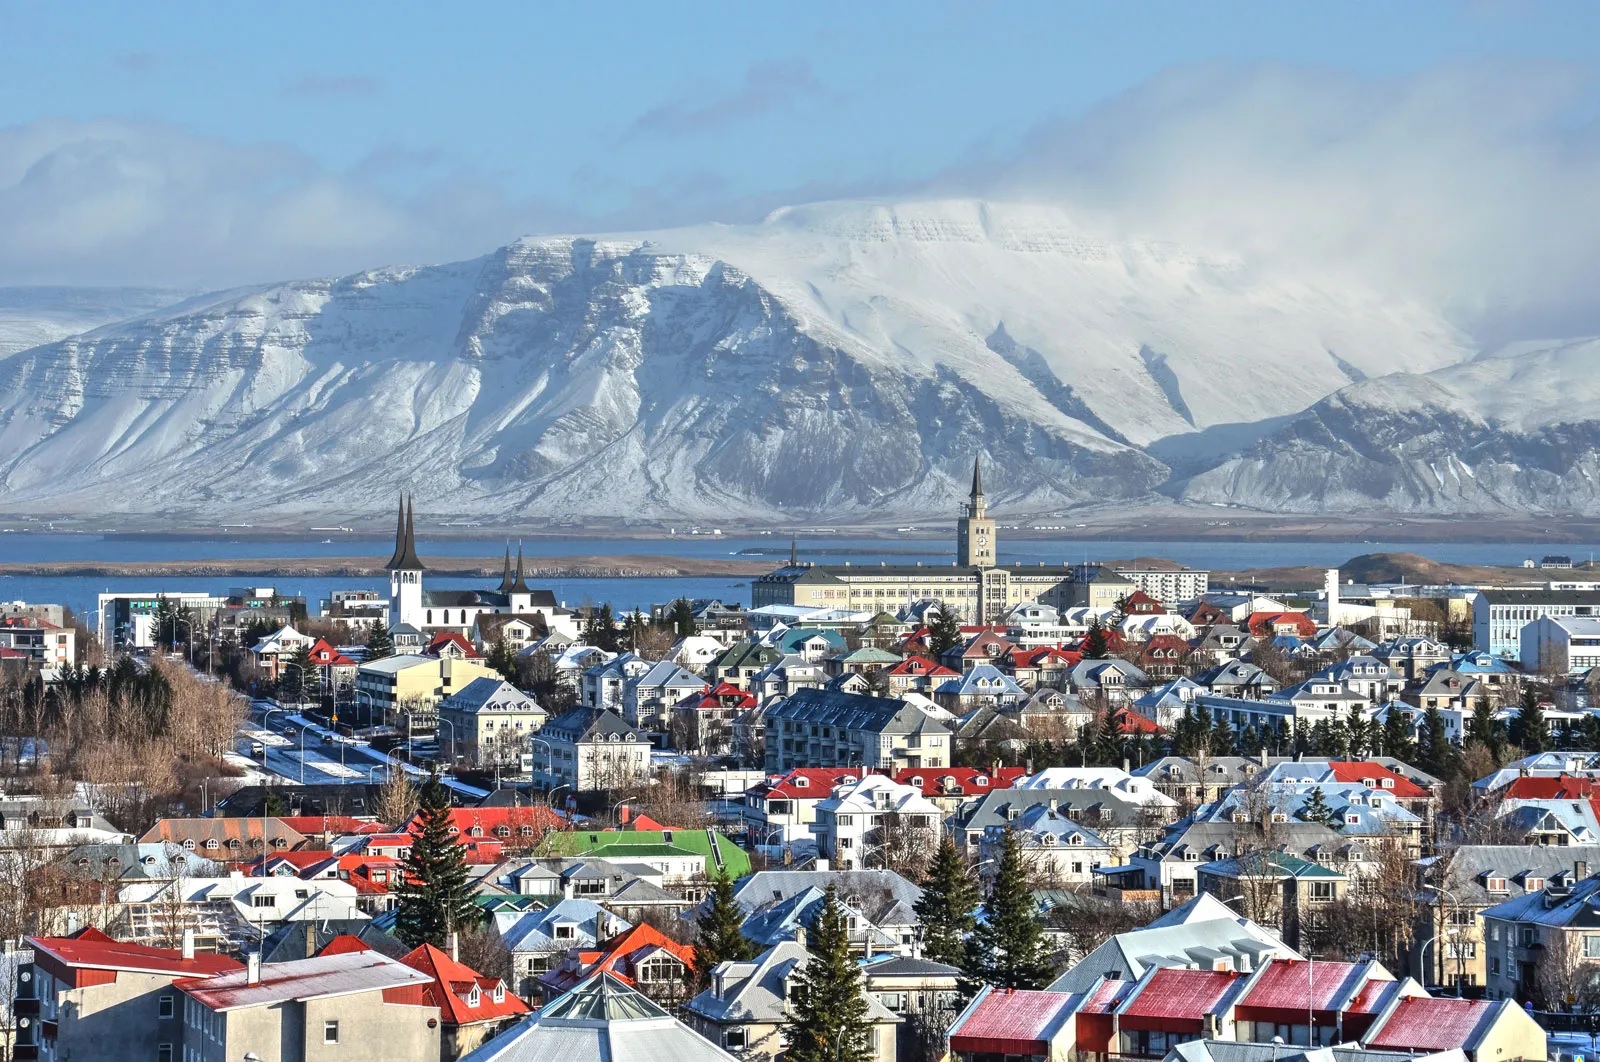 Iceland has been considered the safest country in the world since 2008.